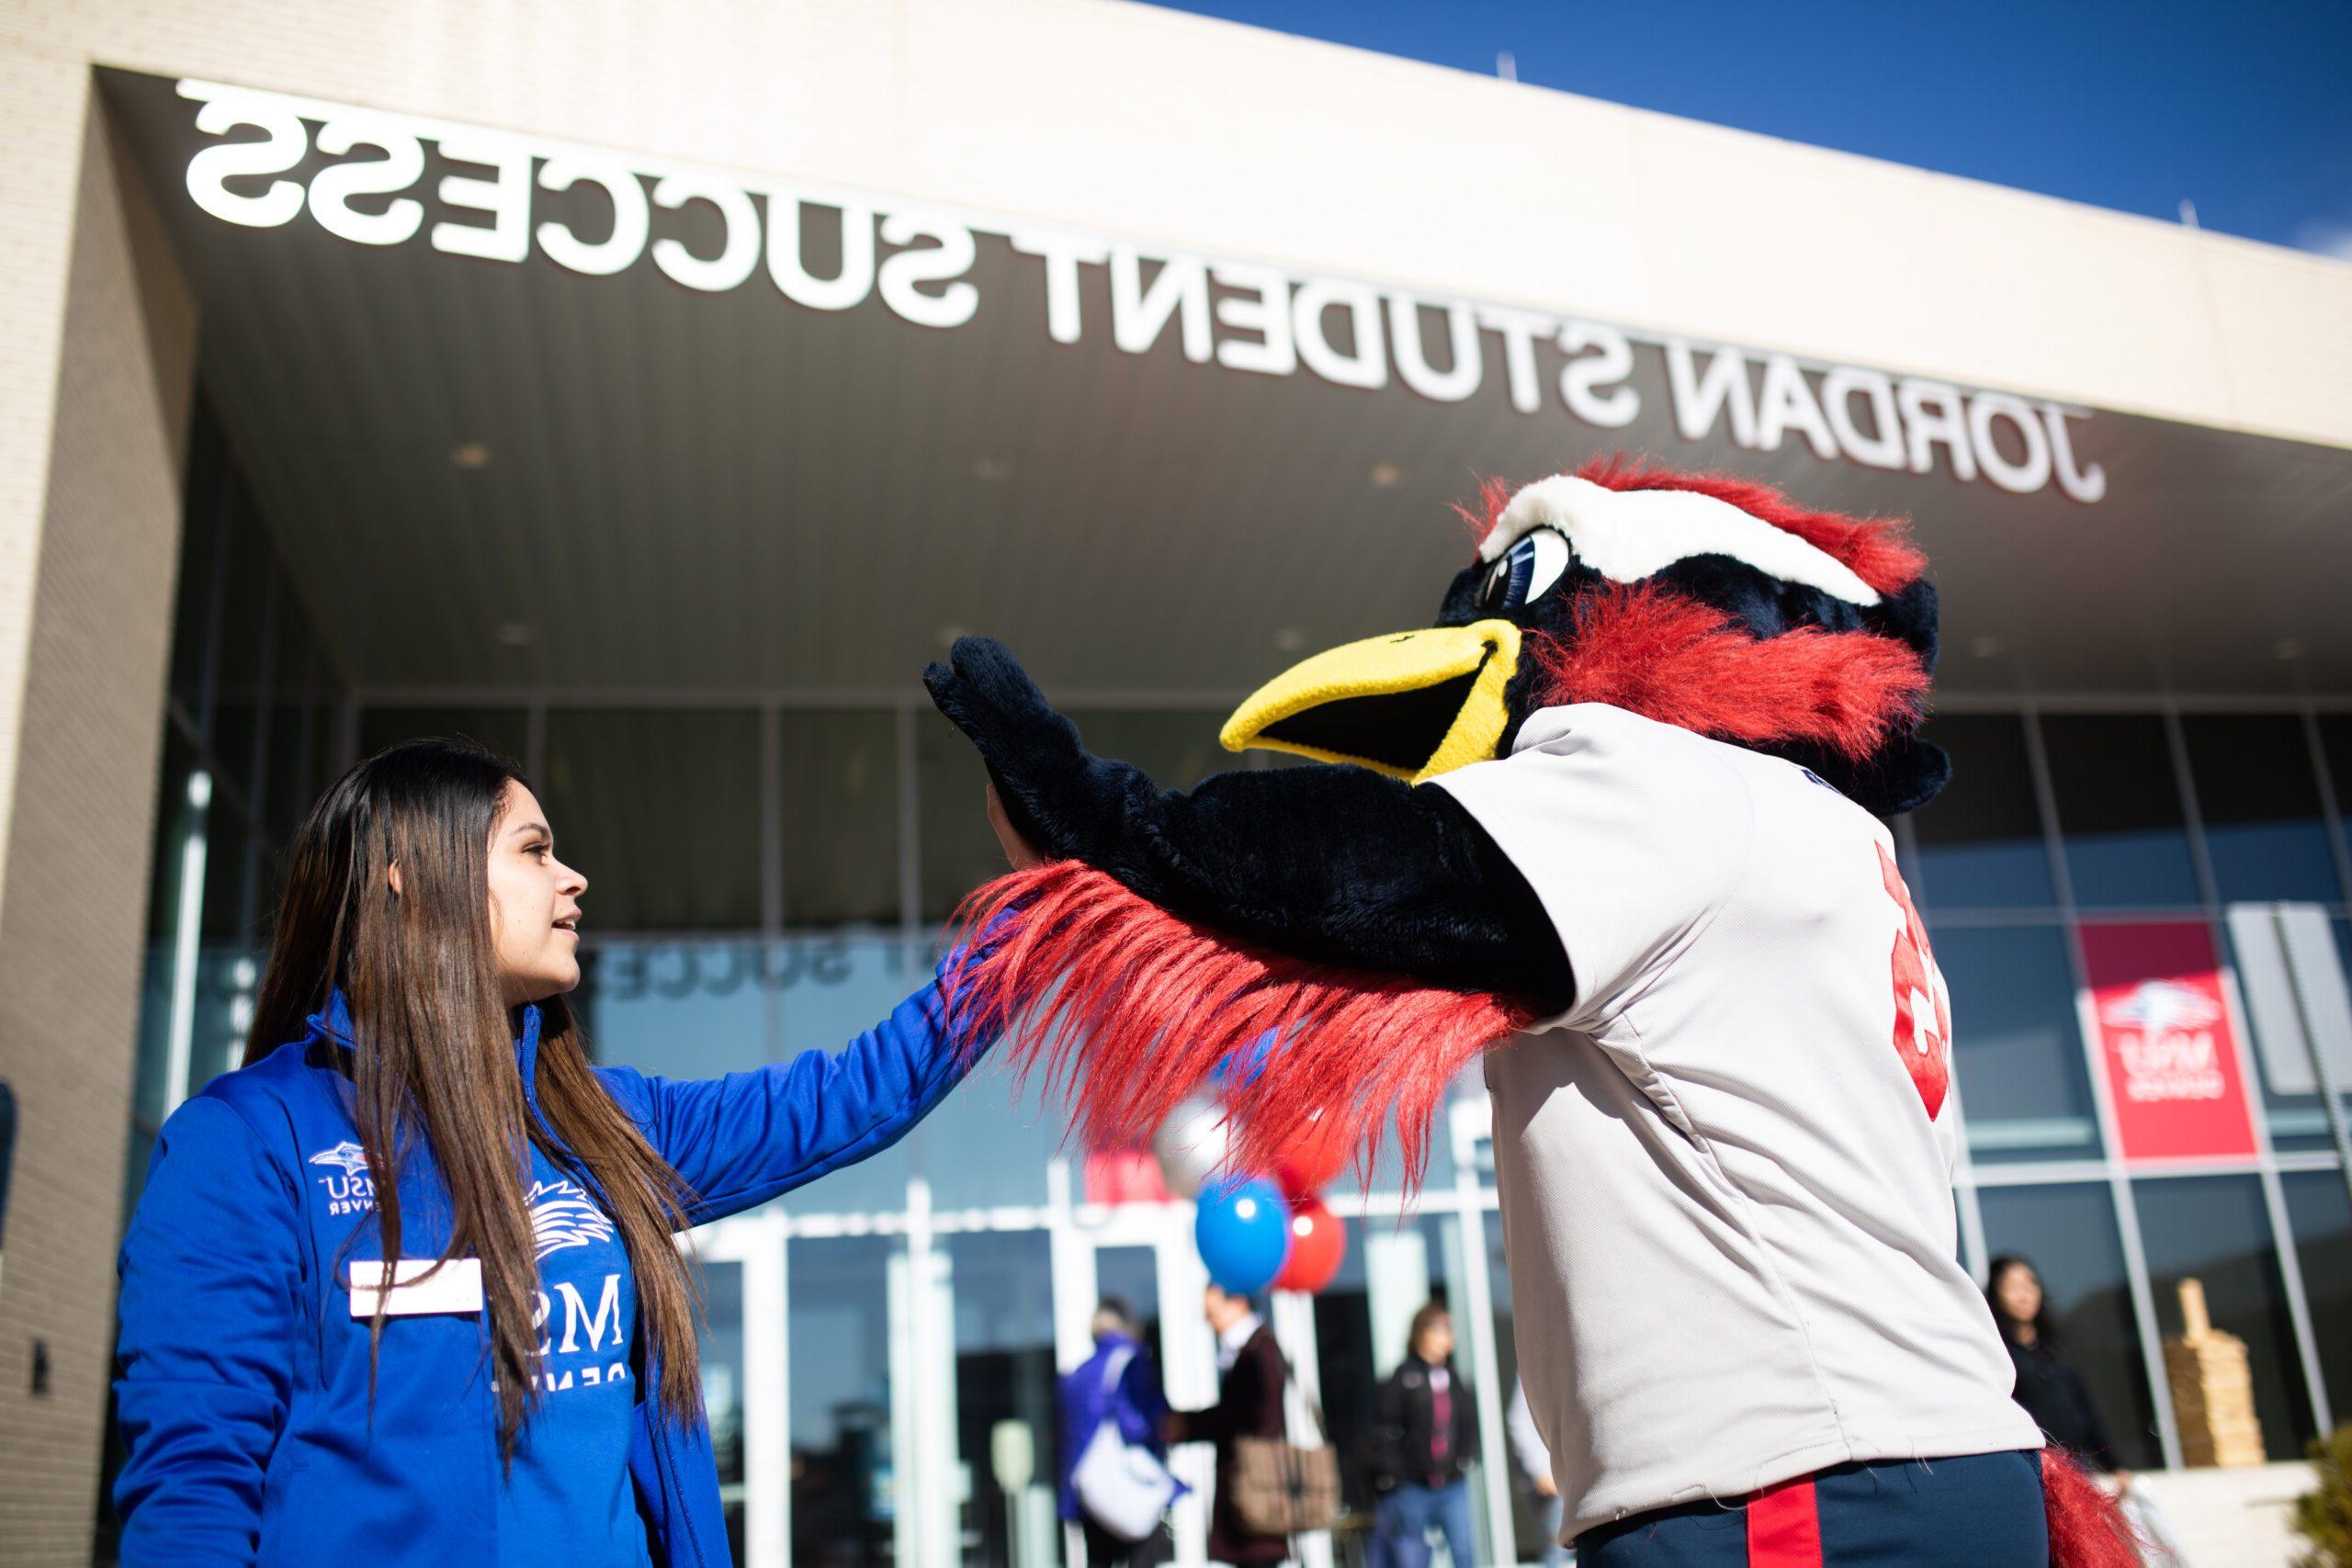 Rowdy the Roadrunner, MSU Denver's mascot, high-fiving a student in front of the Jordan Student Success Building